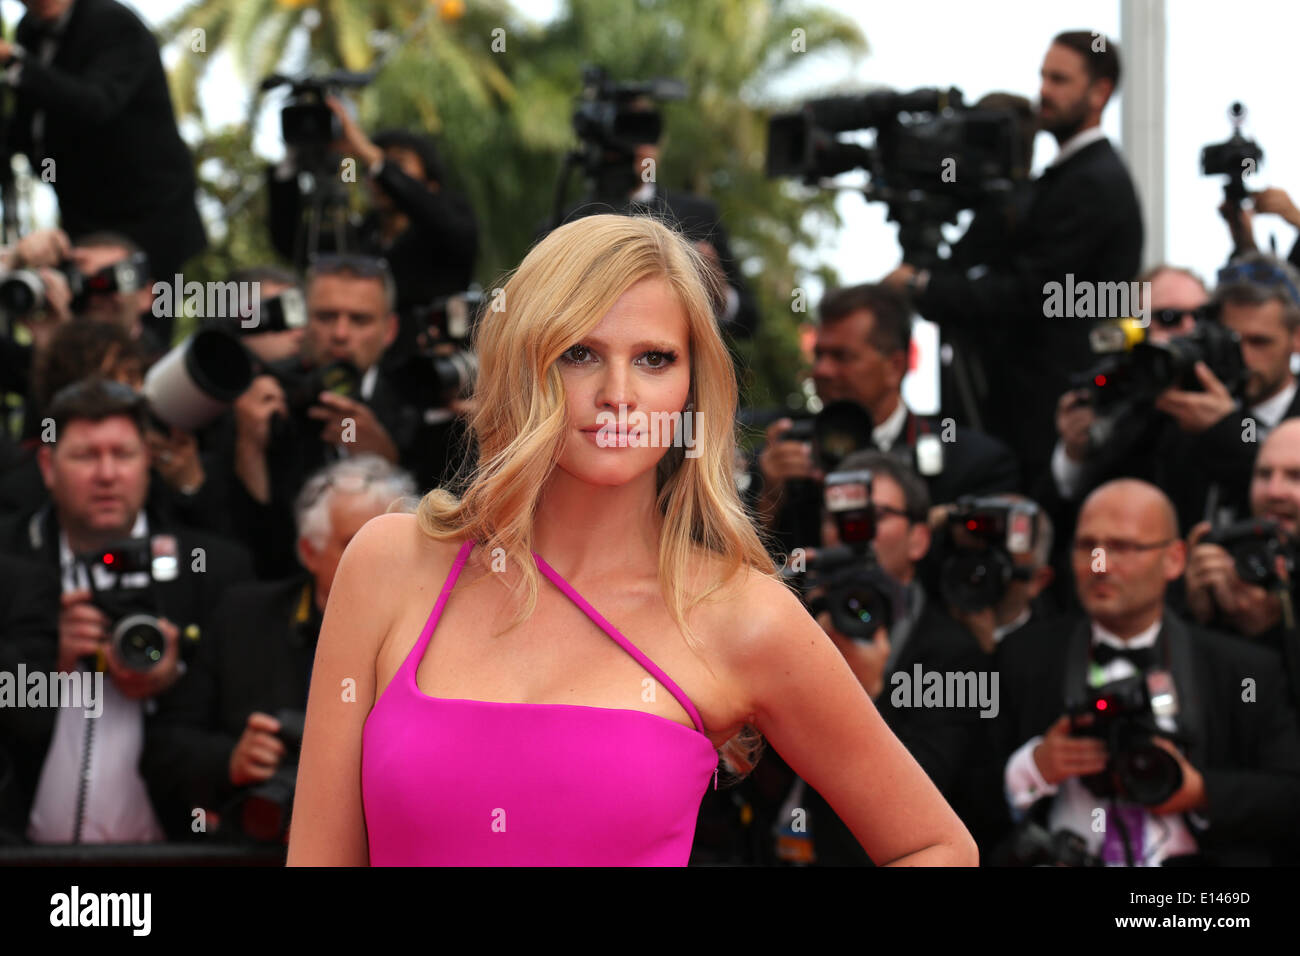 Model Lara Stone attends the premiere of «The Search» during the 67th Cannes International Film Festival at Palais des Festivals in Cannes, France, on 21 May 2014. Photo: Hubert Boesl - NO WIRE SERVICE - Stock Photo